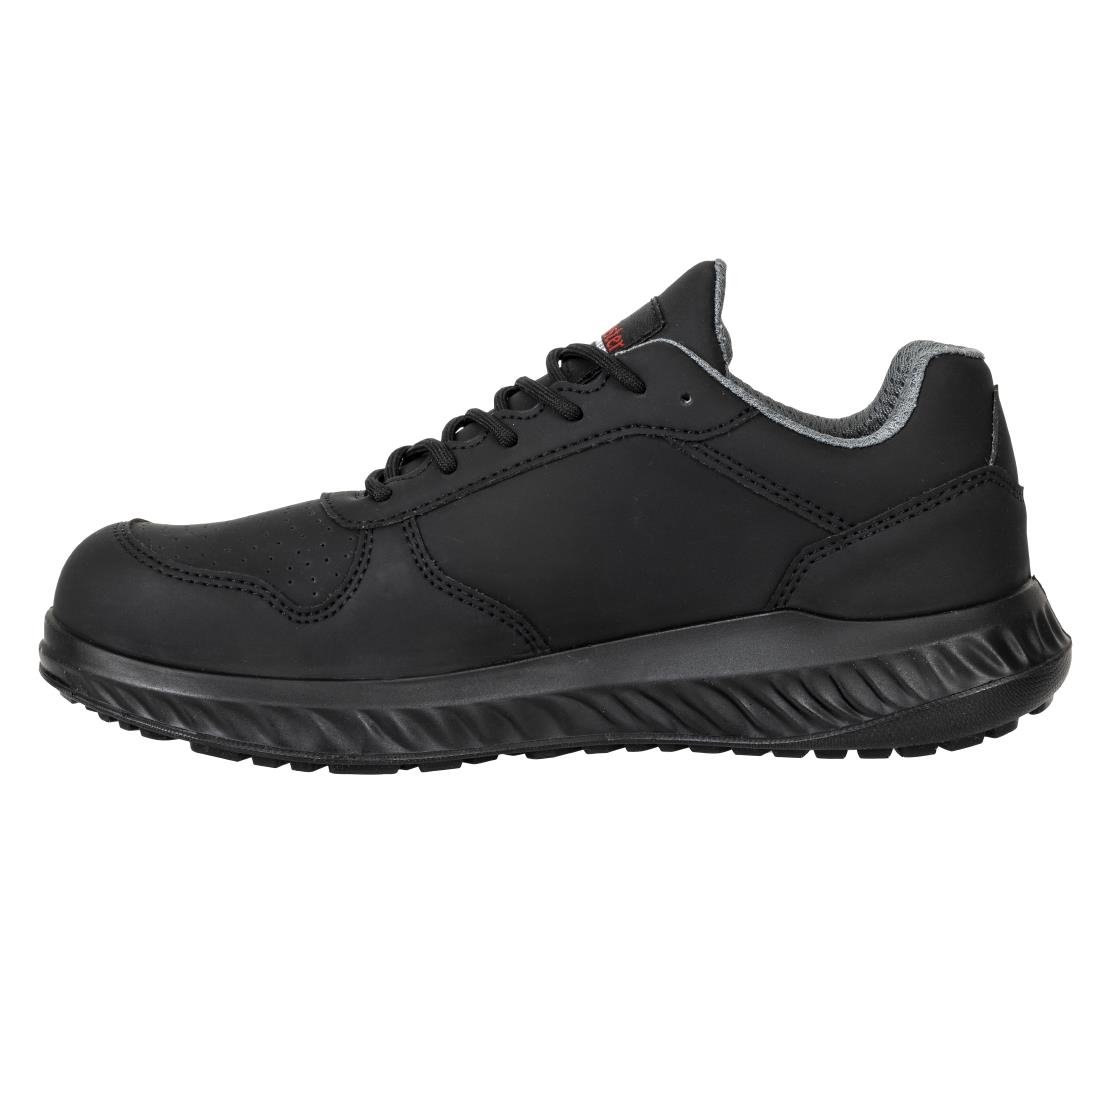 BA063-41 Slipbuster Recycled Microfibre Trainers Matte Black 41 JD Catering Equipment Solutions Ltd